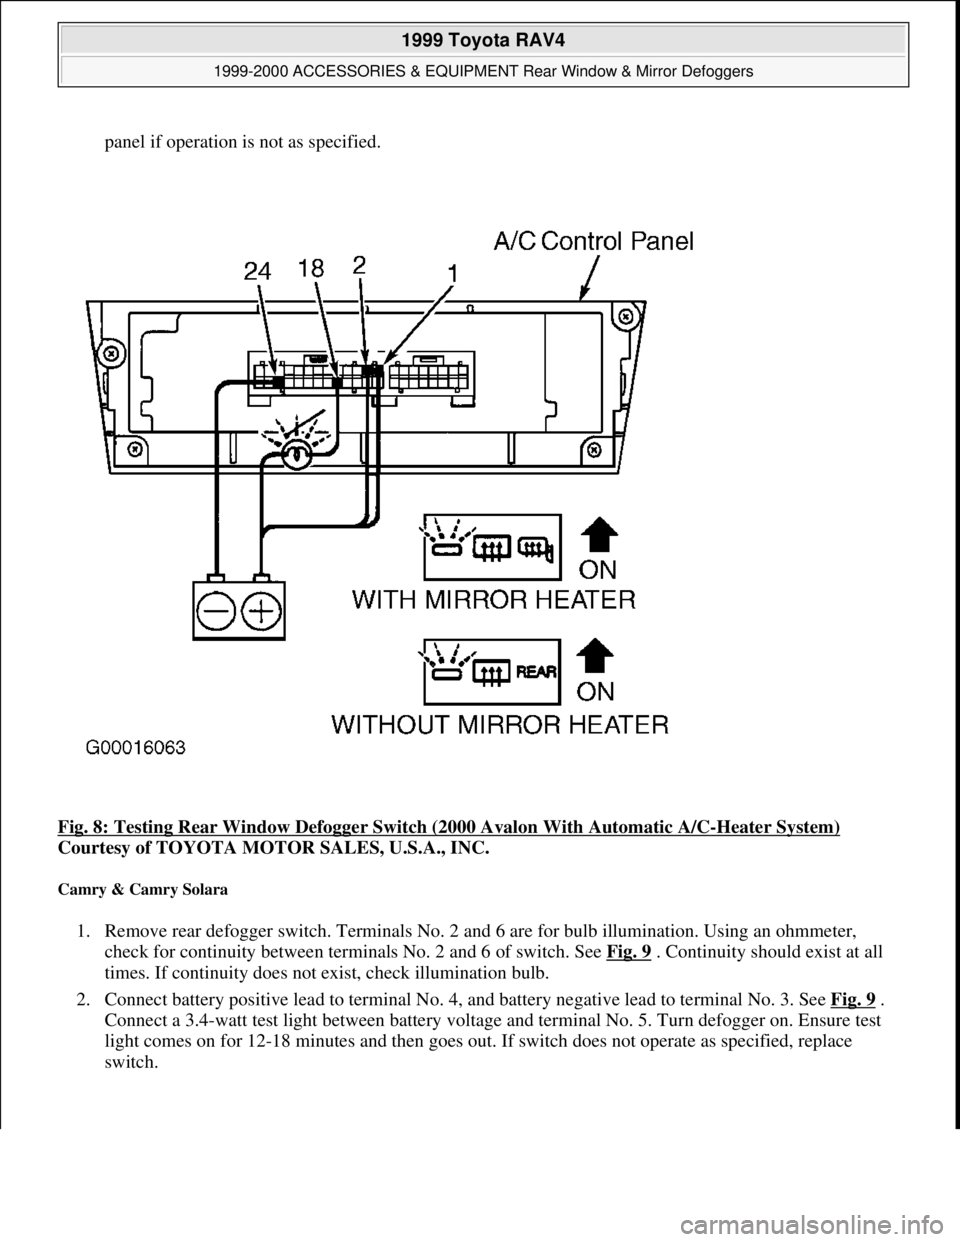 TOYOTA RAV4 1996  Service Repair Manual panel if operation is not as specified. 
Fig. 8: Testing Rear Window Defogger Switch (2000 Avalon With Automatic A/C
-Heater System) 
Courtesy of TOYOTA MOTOR SALES, U.S.A., INC. 
Camry & Camry Solara